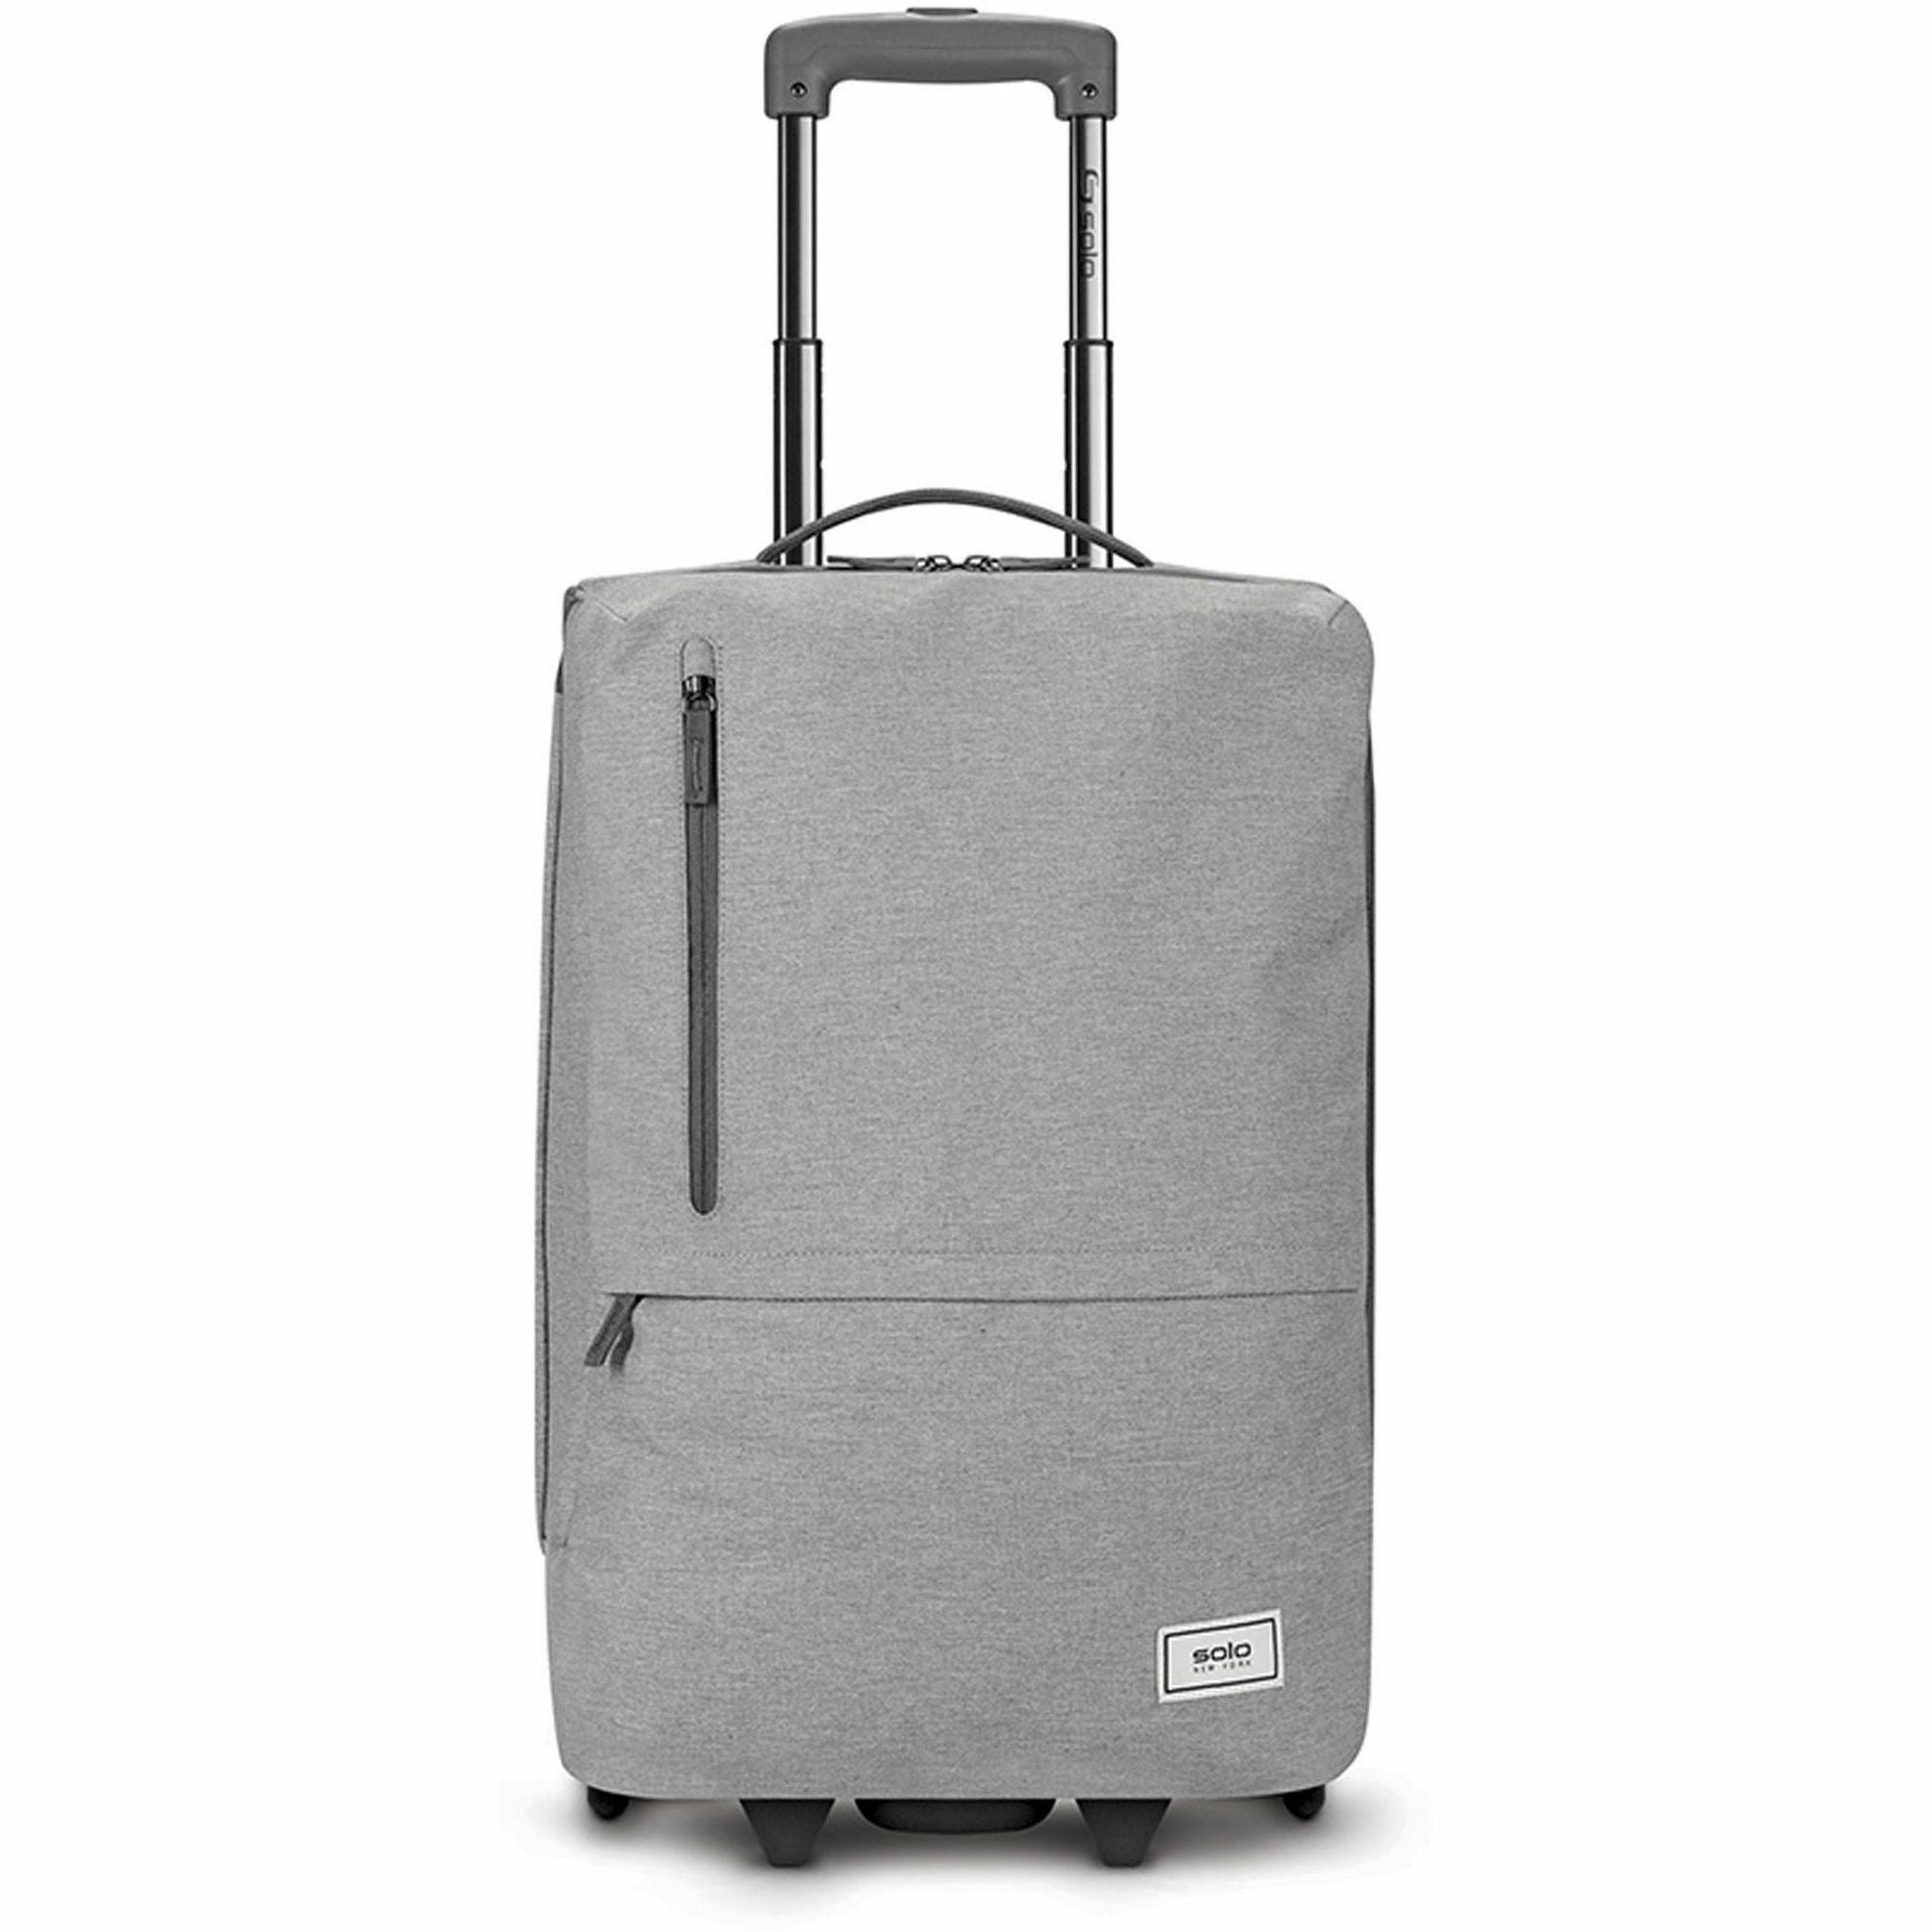 solo-retreat-travel-luggage-case-carry-on-luggage-travel-essential-gray-handle-22-height-x-14-width-x-7-depth-1-each_uslubn91410 - 3